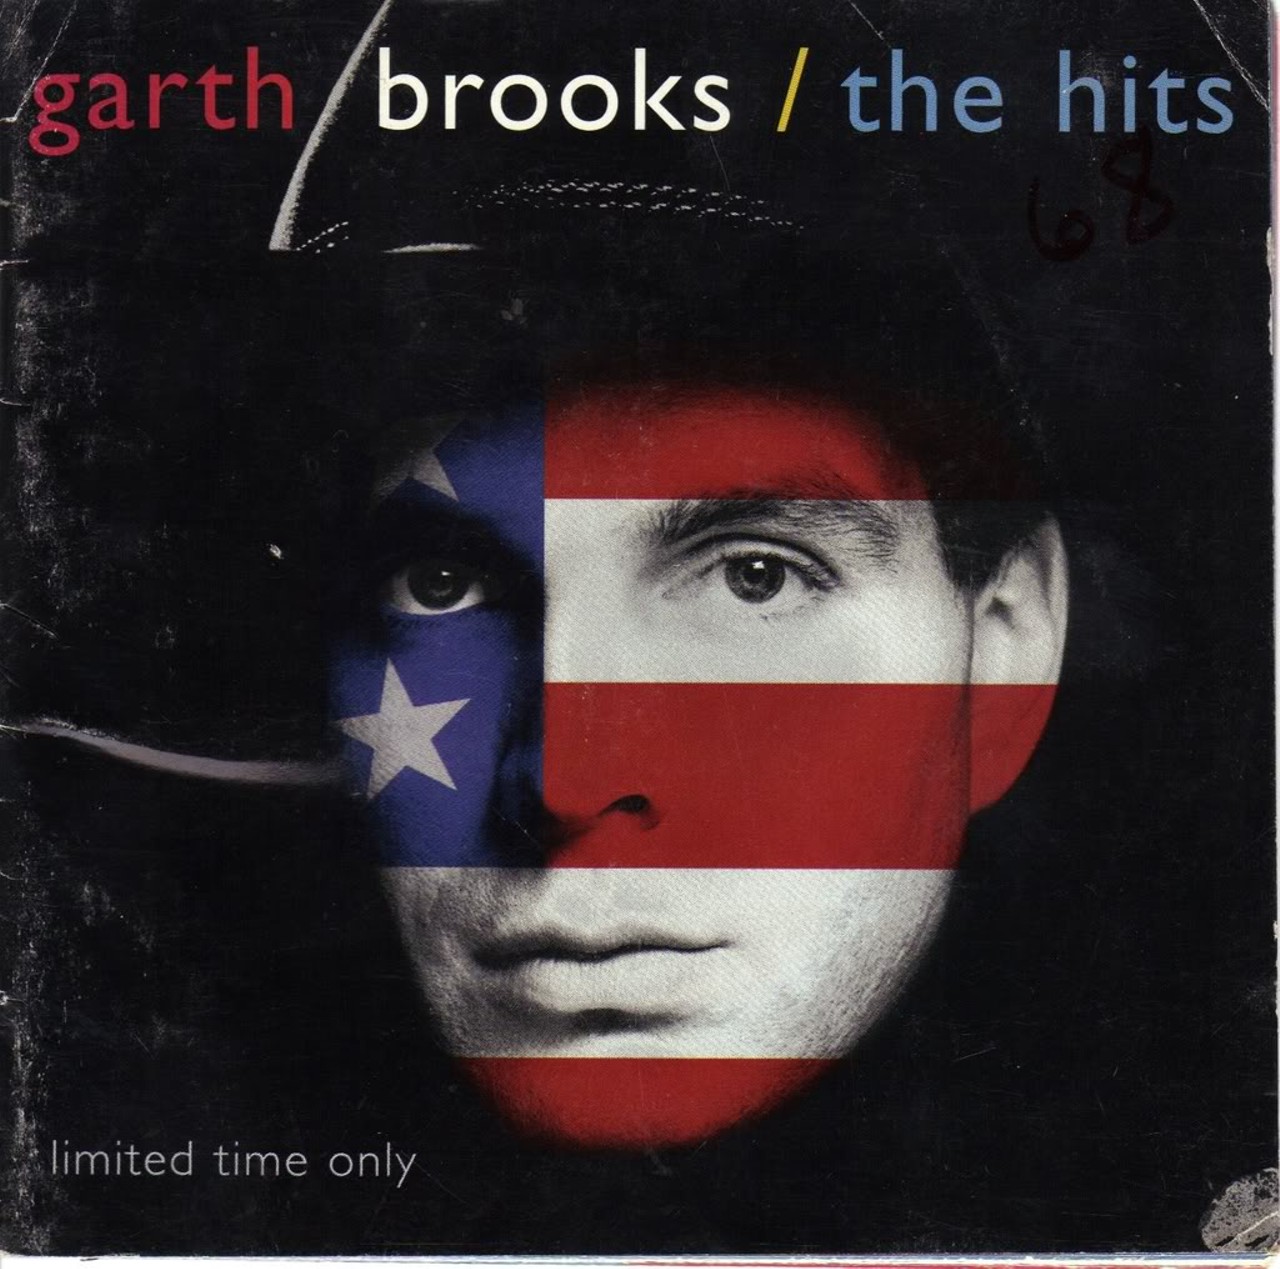 Garth Brooks - The Hits (1994)
1994's The Hits has Garth Brooks' face covered in the colors of the American flag and honestly, it's a little creepy. He looks a little like an alien, with those wide-open unblinking eyes. Conversely, the songs on this record -- "Friends in Low Places" -- have become downright iconic in country bars and un-air-conditioned gas stations across the South.